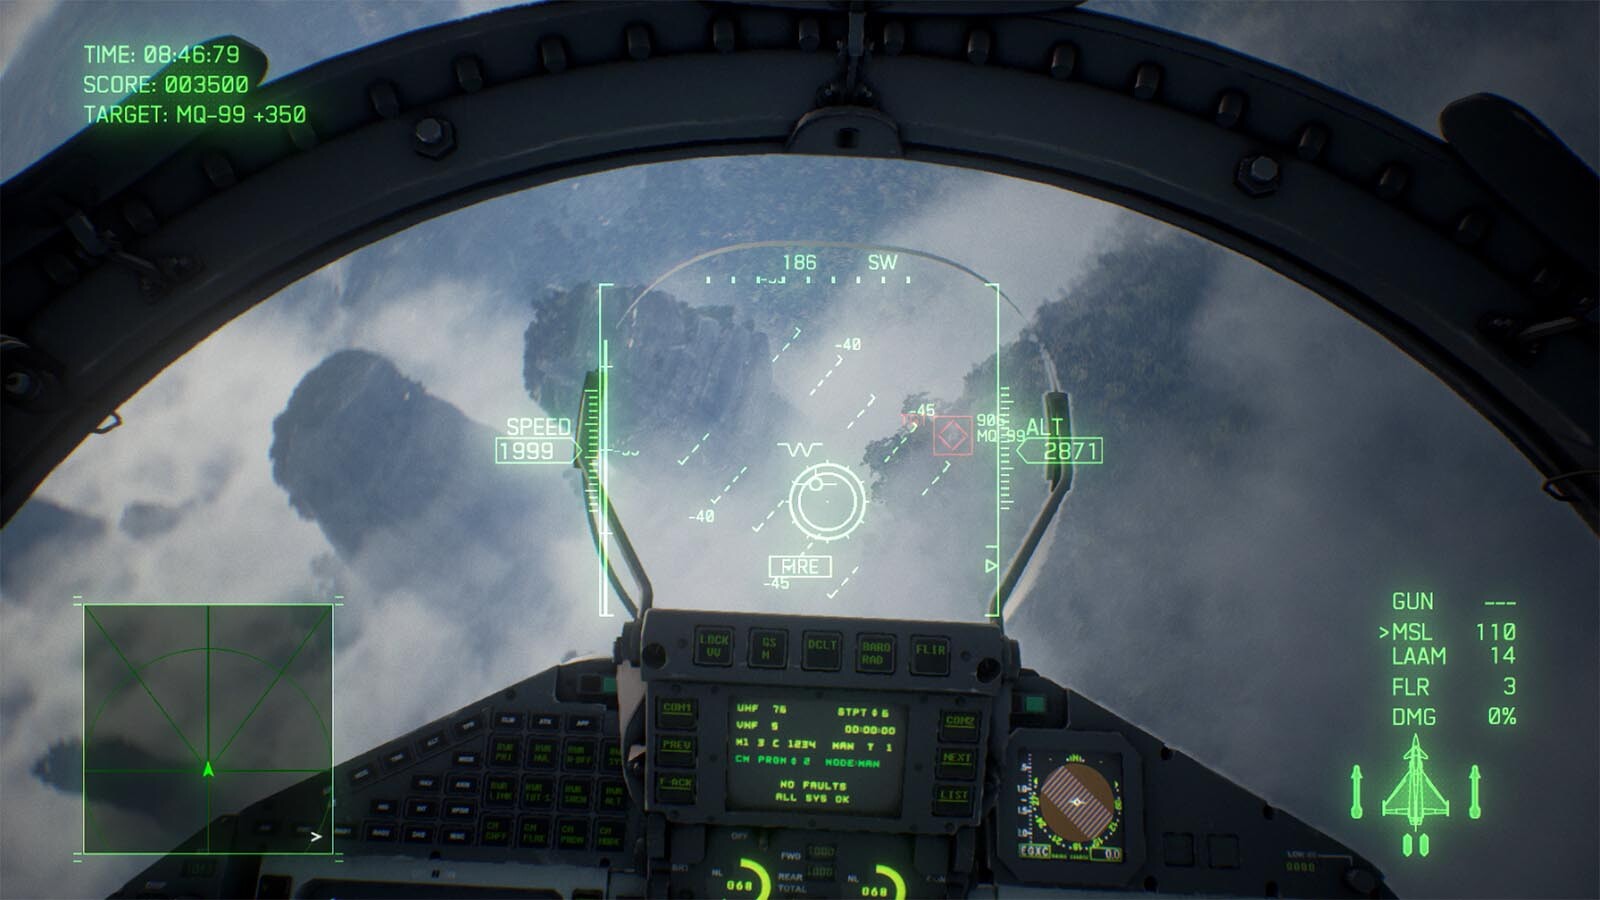 ACE COMBAT™ 7: SKIES UNKNOWN Season Pass - PC Game –